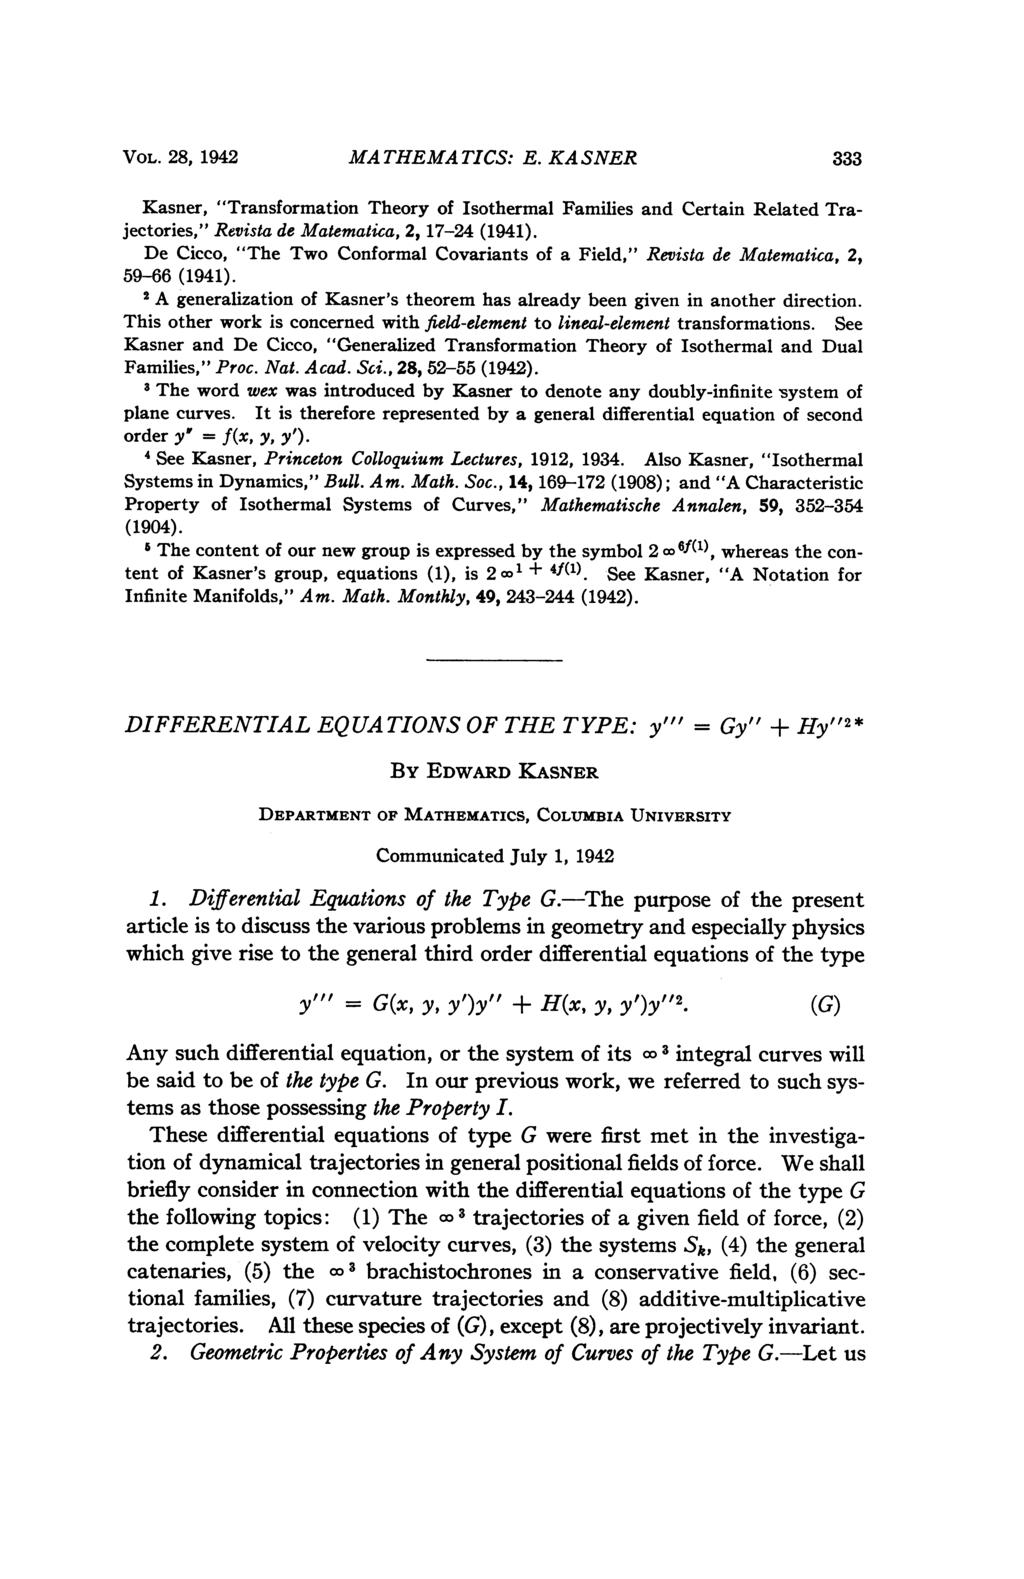 VOL. 28, 1942 MA THEMA TICS: E. KA SNER 333 Kasner, "Transformation Theory of Isothermal Families and Certain Related Trajectories," Revista de Matematica, 2, 17-24 (1941).